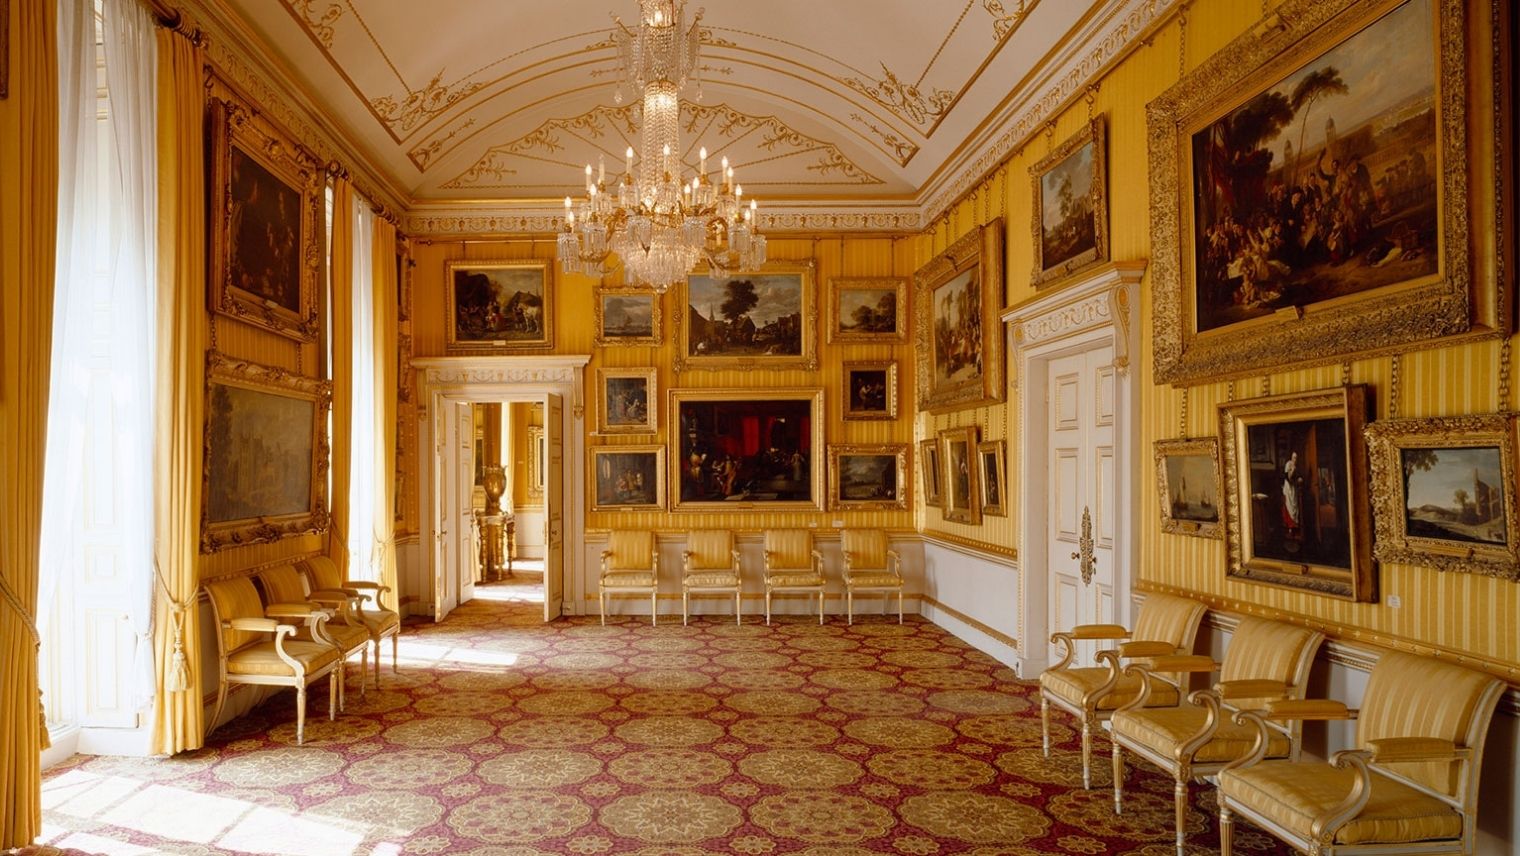 Interior of Apsley House